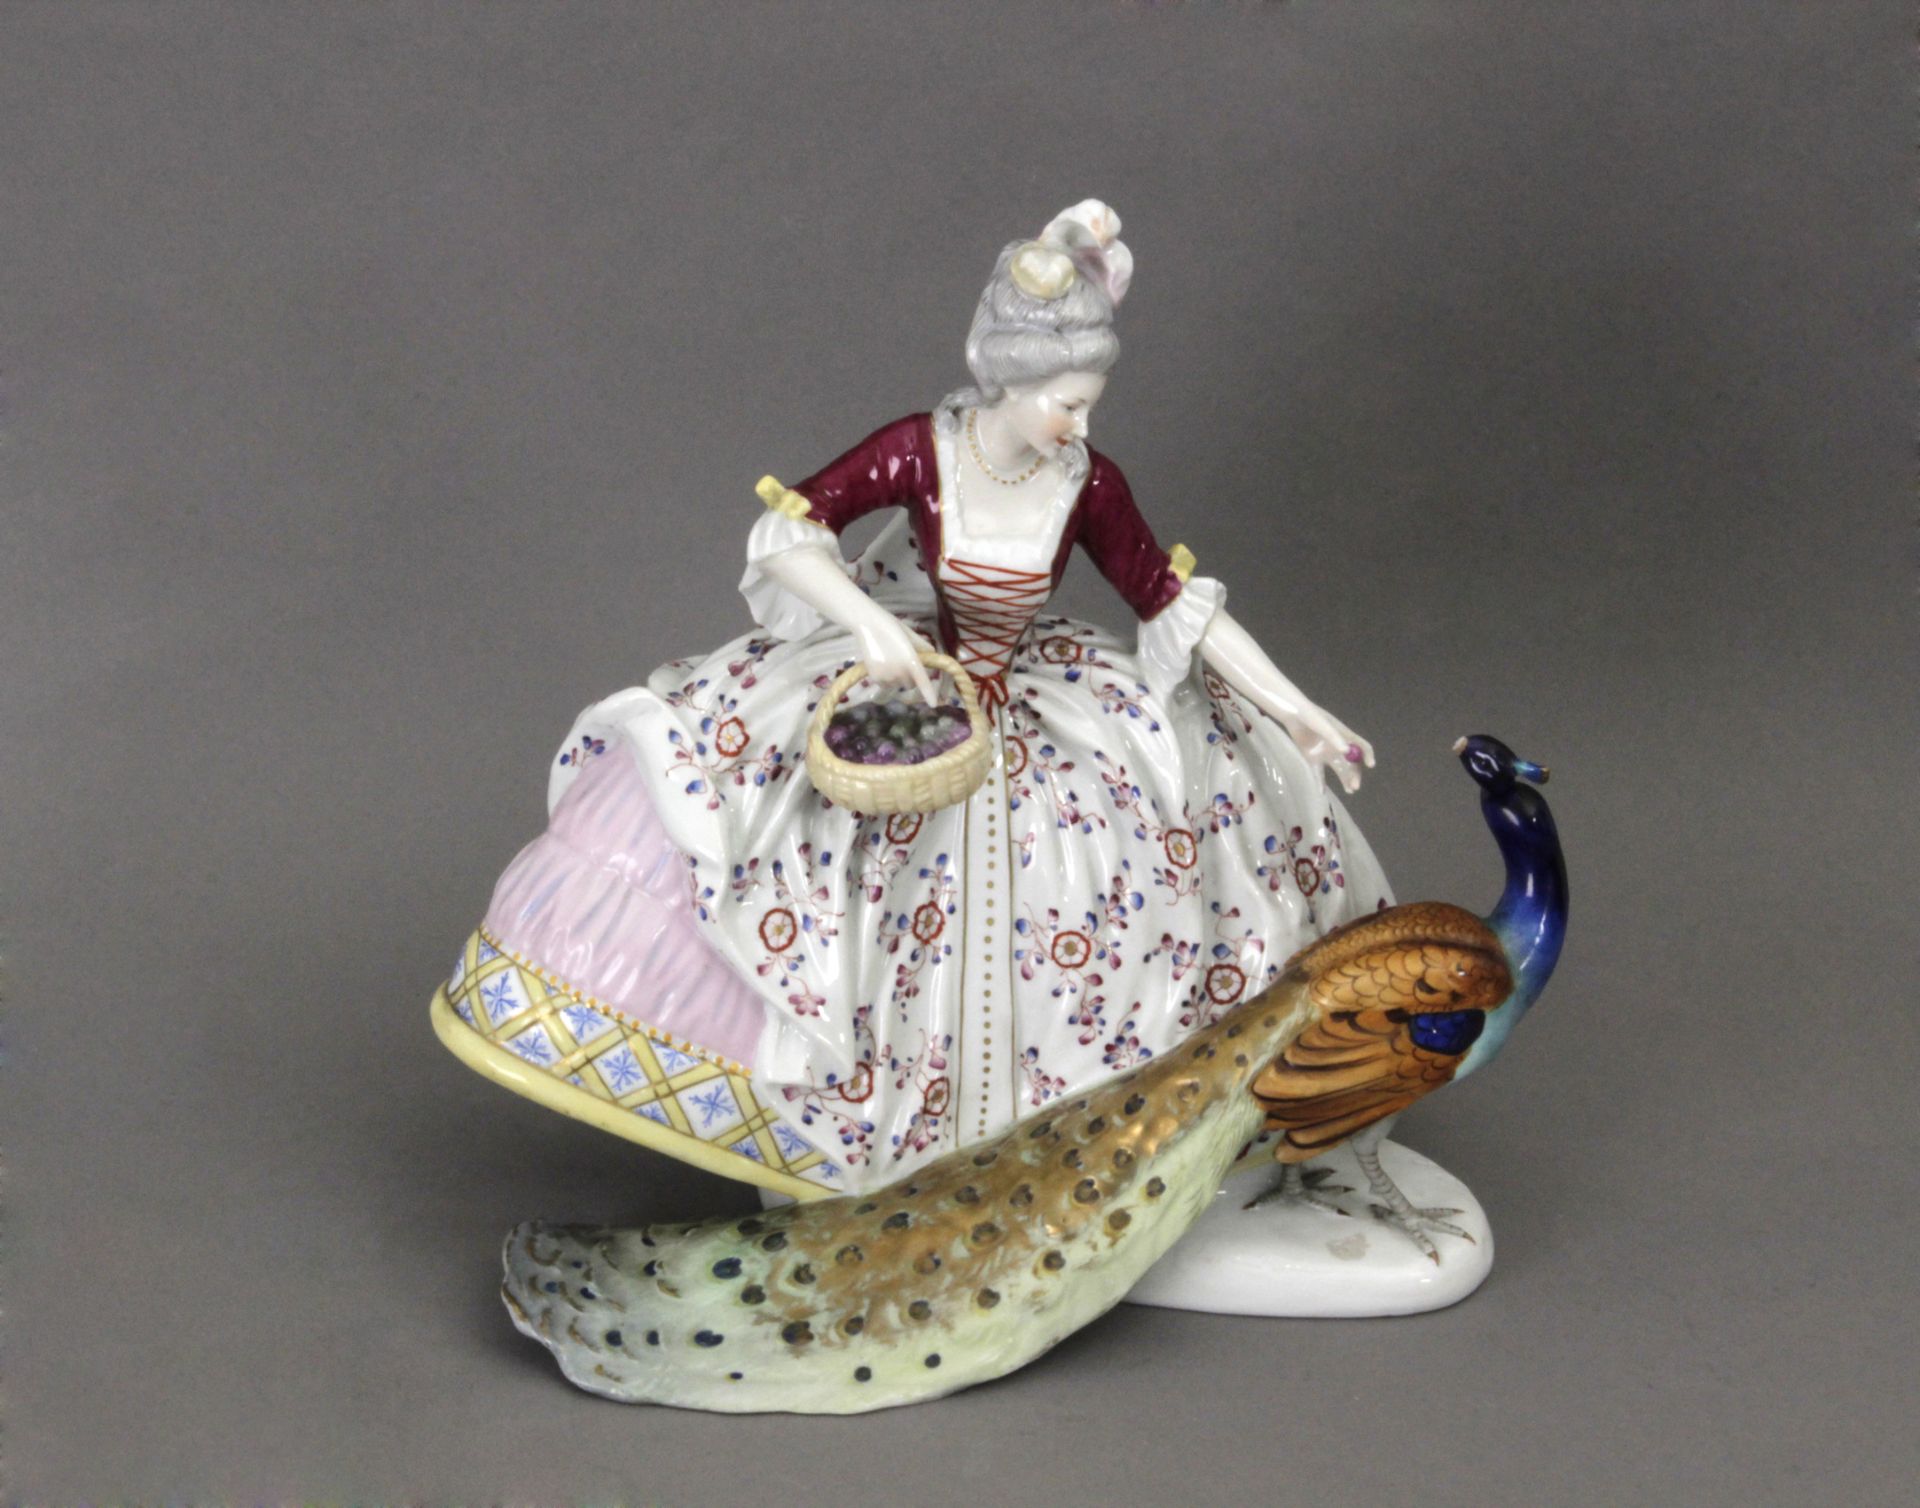 A. Berger signed. Early 20th century dame figure in German porcelain